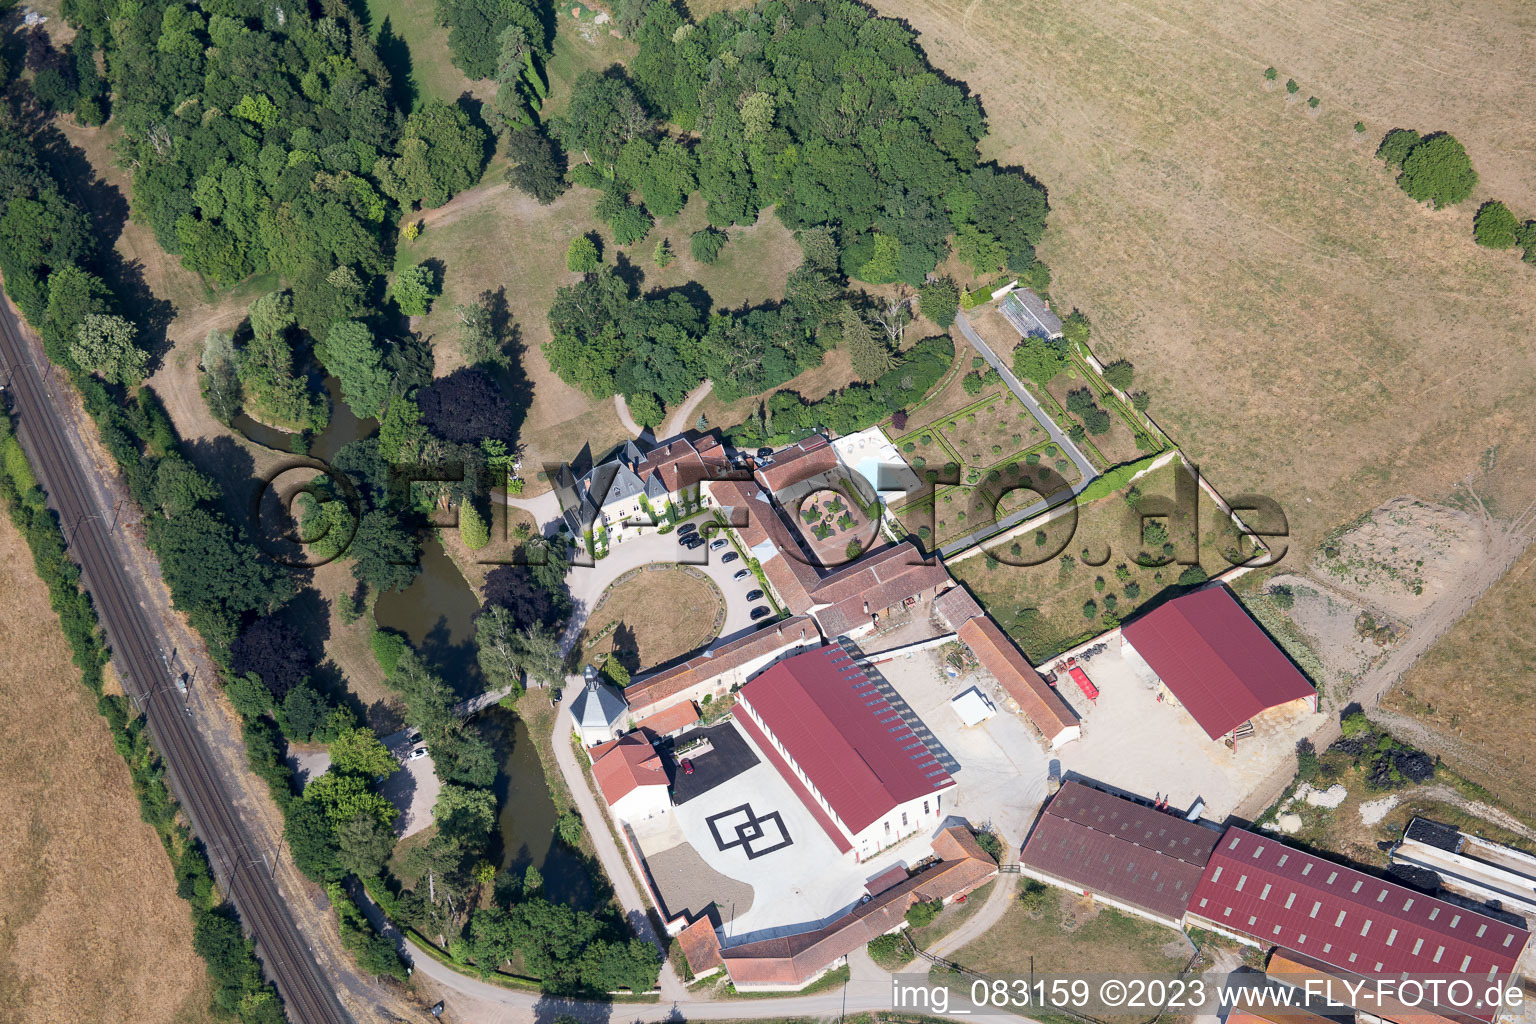 Aerial view of Rehainviller in the state Meurthe et Moselle, France